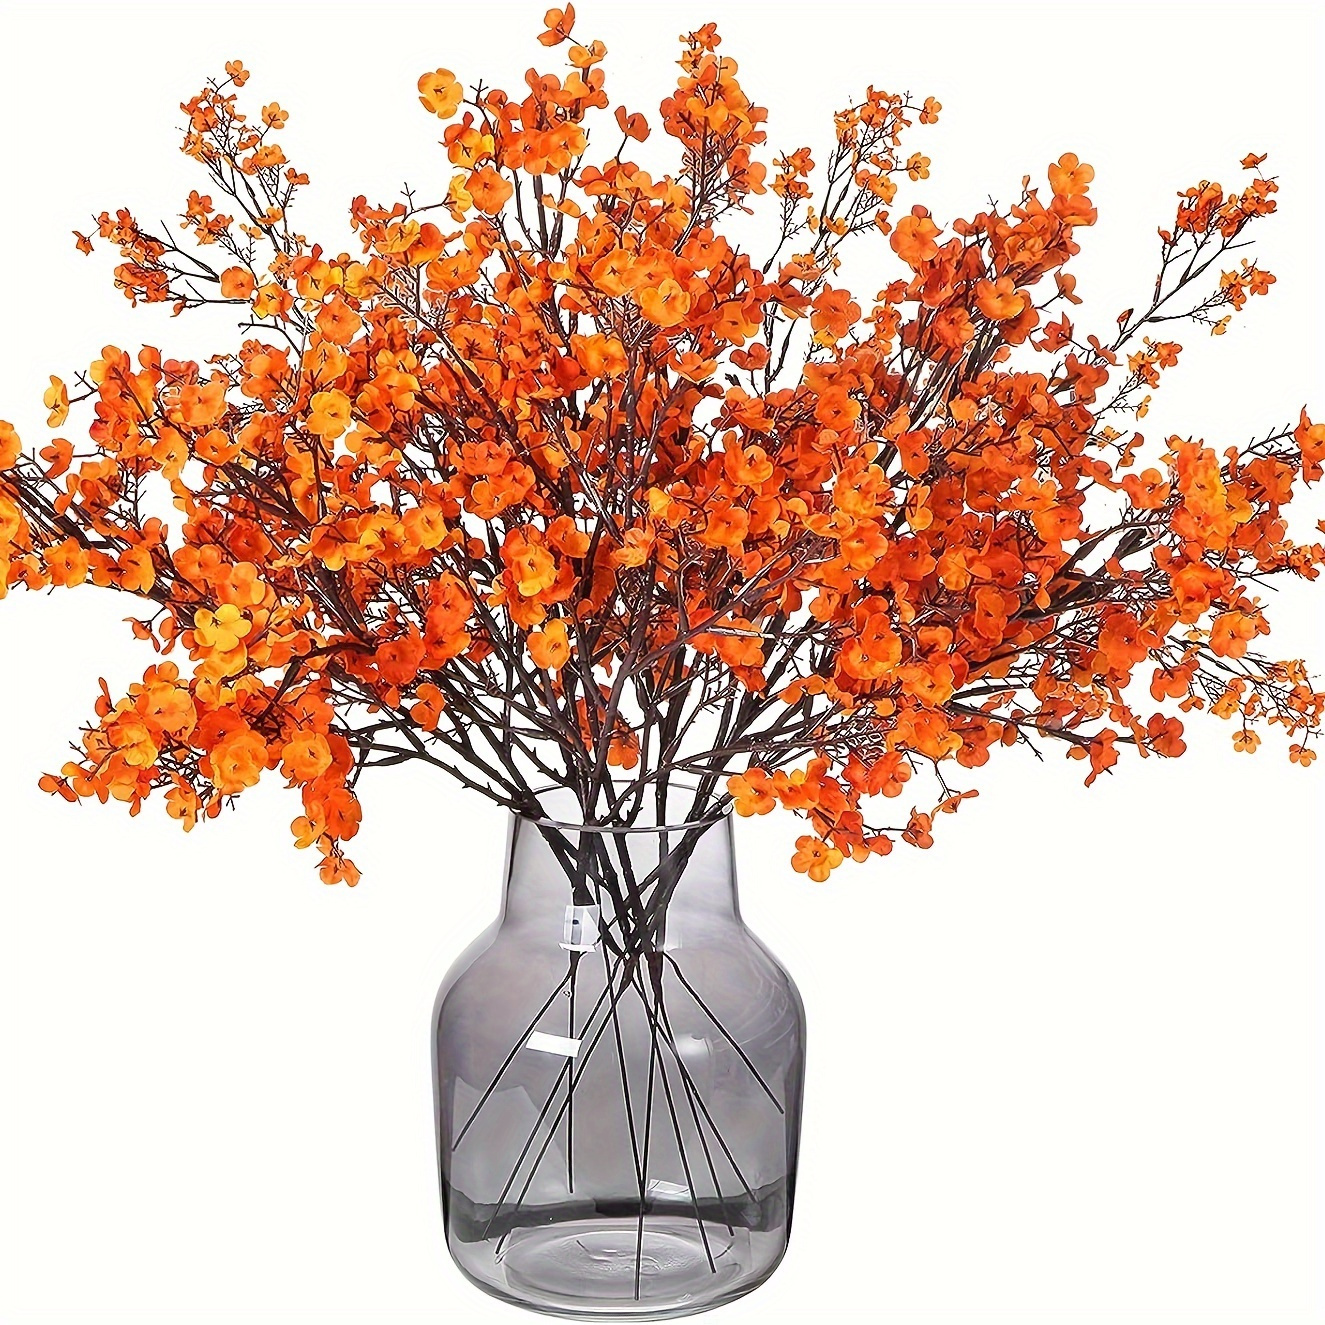 

6pcs Artificial Flowers, Artificial Gypsy Flower Bouquet For Home Kitchen Bedroom Decor, Fake Baby Breath Flowers Bulk For Holiday Wedding Christmas Party Decoration (orange)